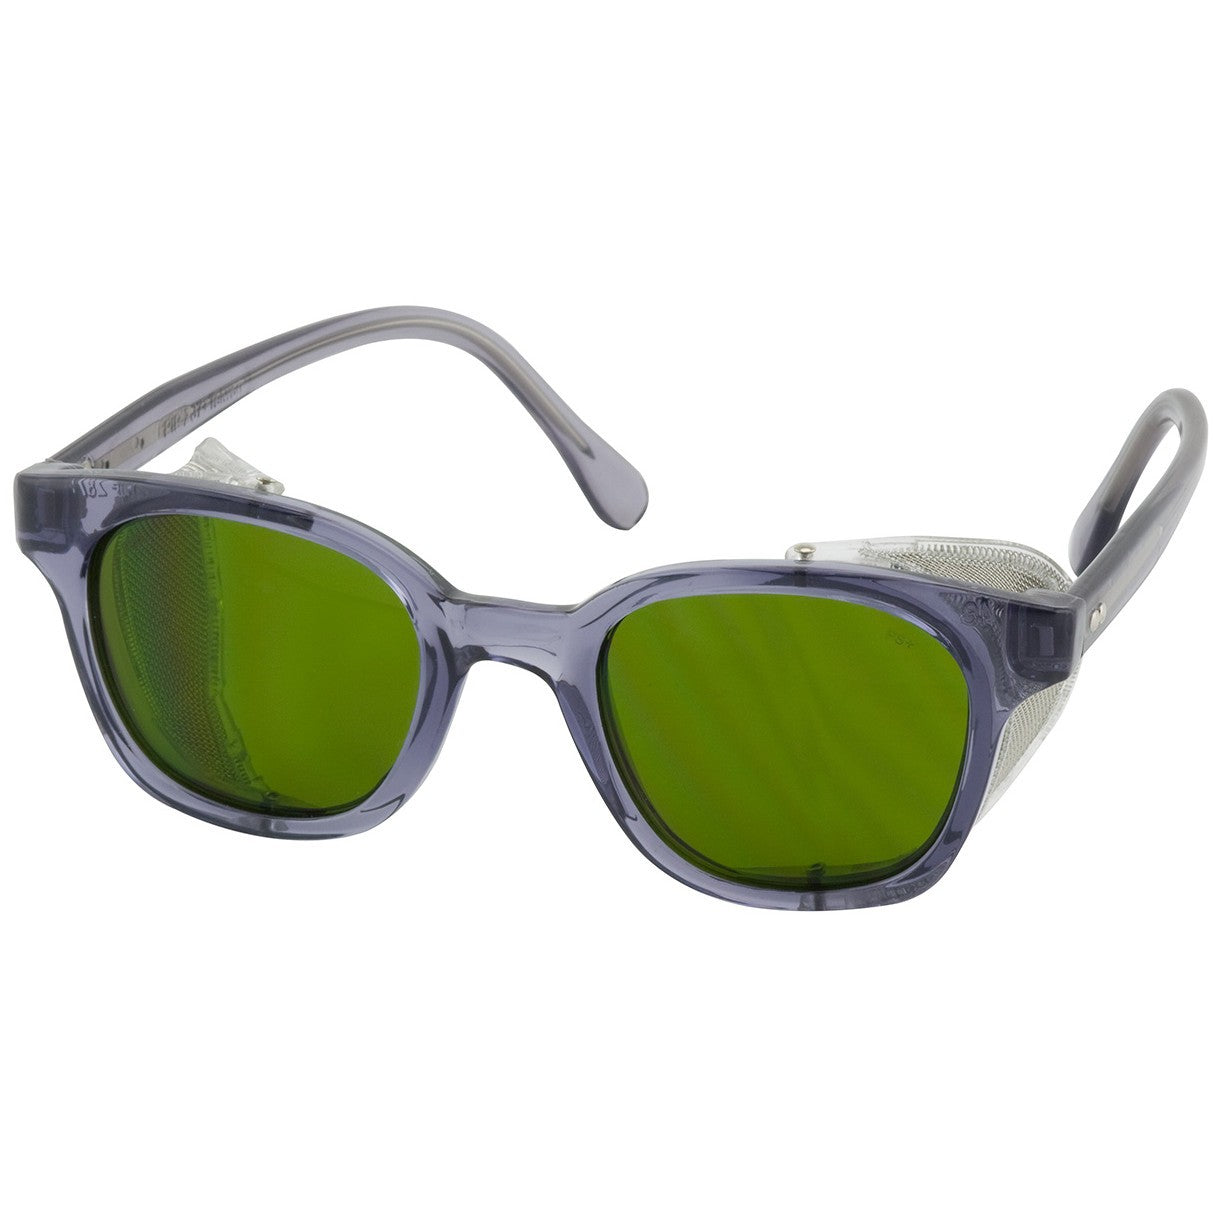 Traditional Safety Glasses - Green Lens